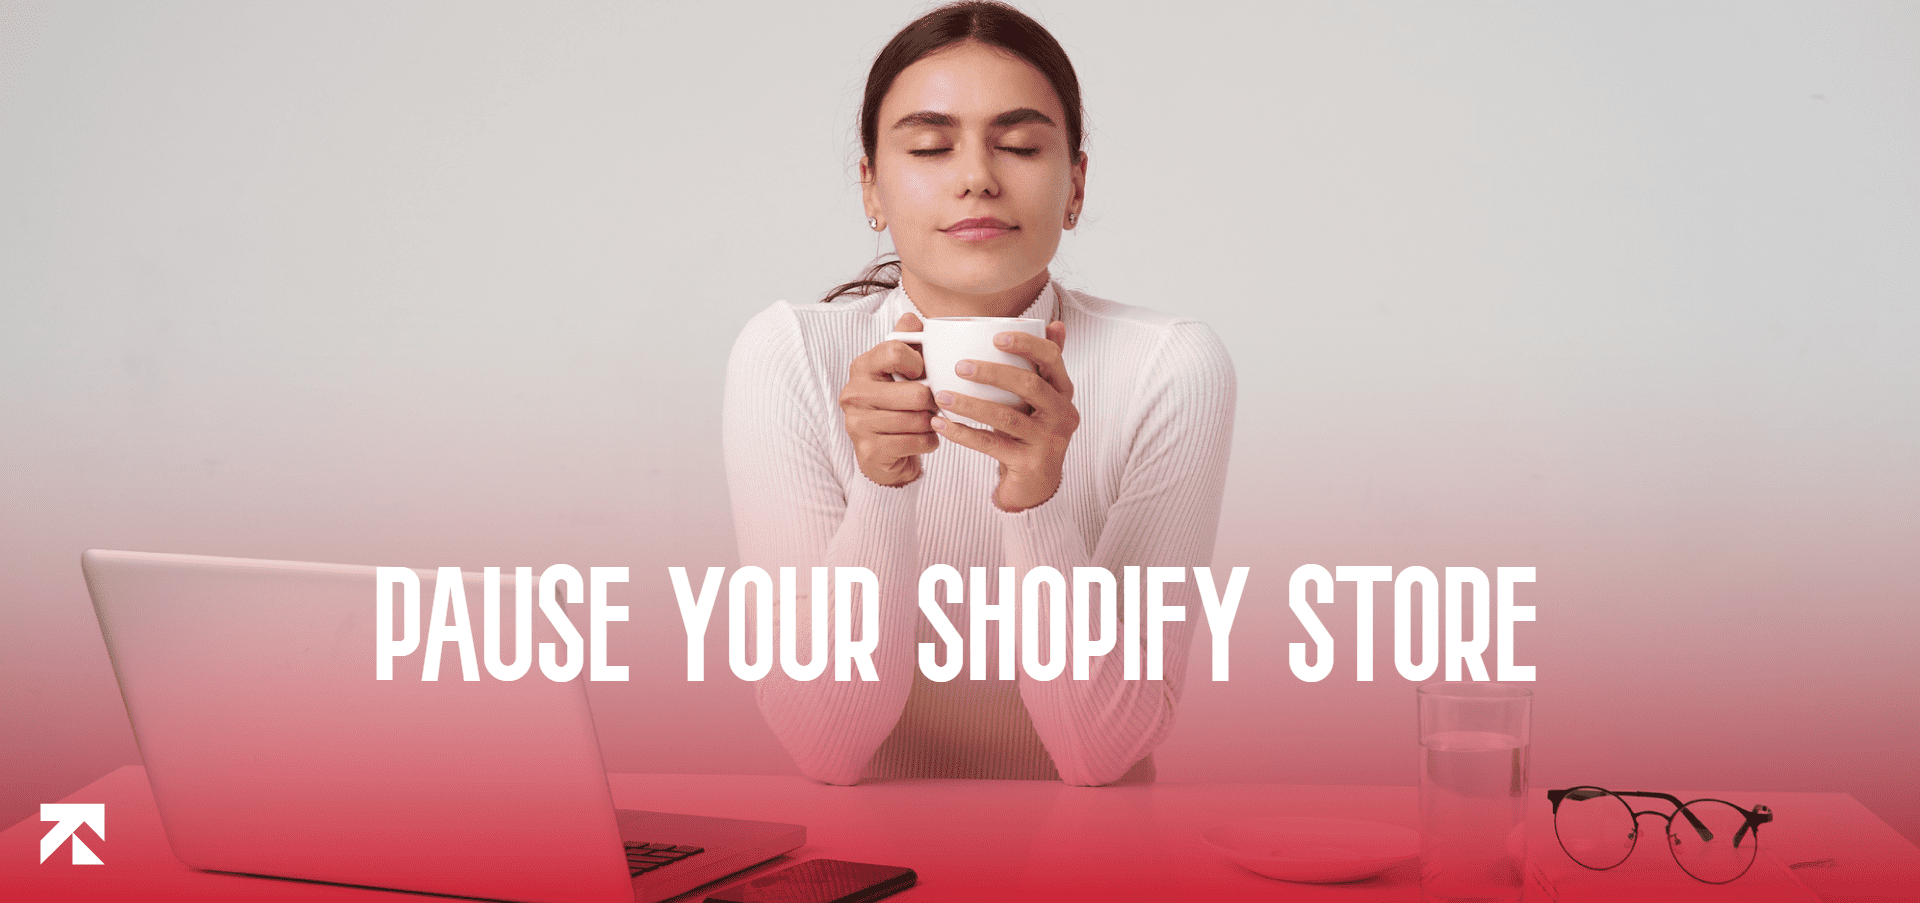 how to pause your shopify store